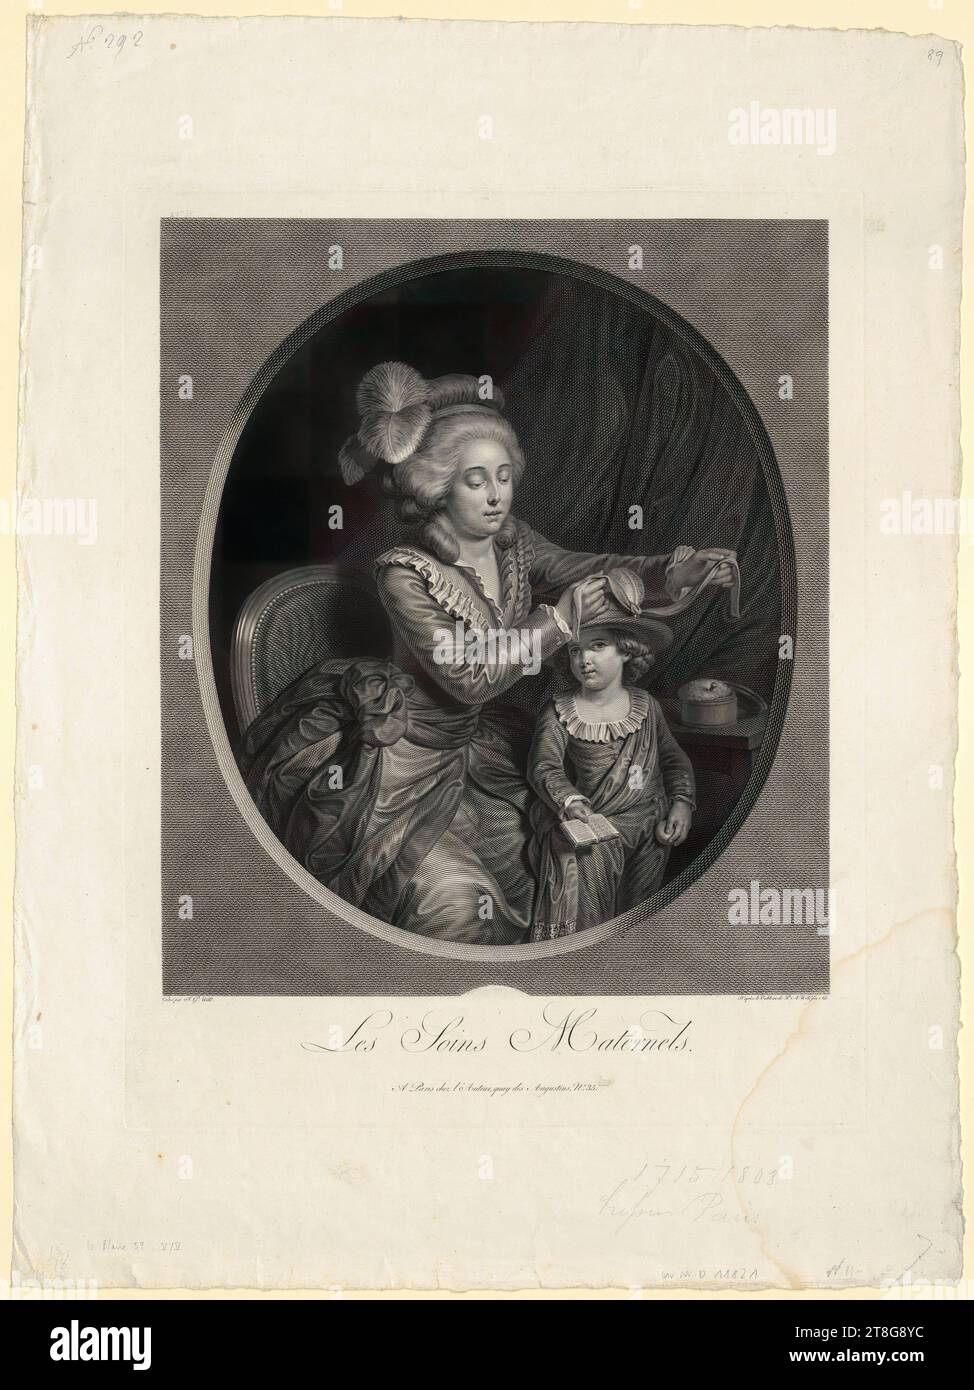 Johann Georg Wille (1715 - 1808)Pierre Alexandre Wille (1748 - 1821, 1827), after, Les soins maternelles, Origin of the print medium: 1784, copperplate engraving and etching, sheet size: 58.7 x 43.9 cm platemark: 43.4 x 34.3 cm, top left inscribed '27.te Pl....', top center inscribed 'Will spiegelkehrt', bottom left si Stock Photo